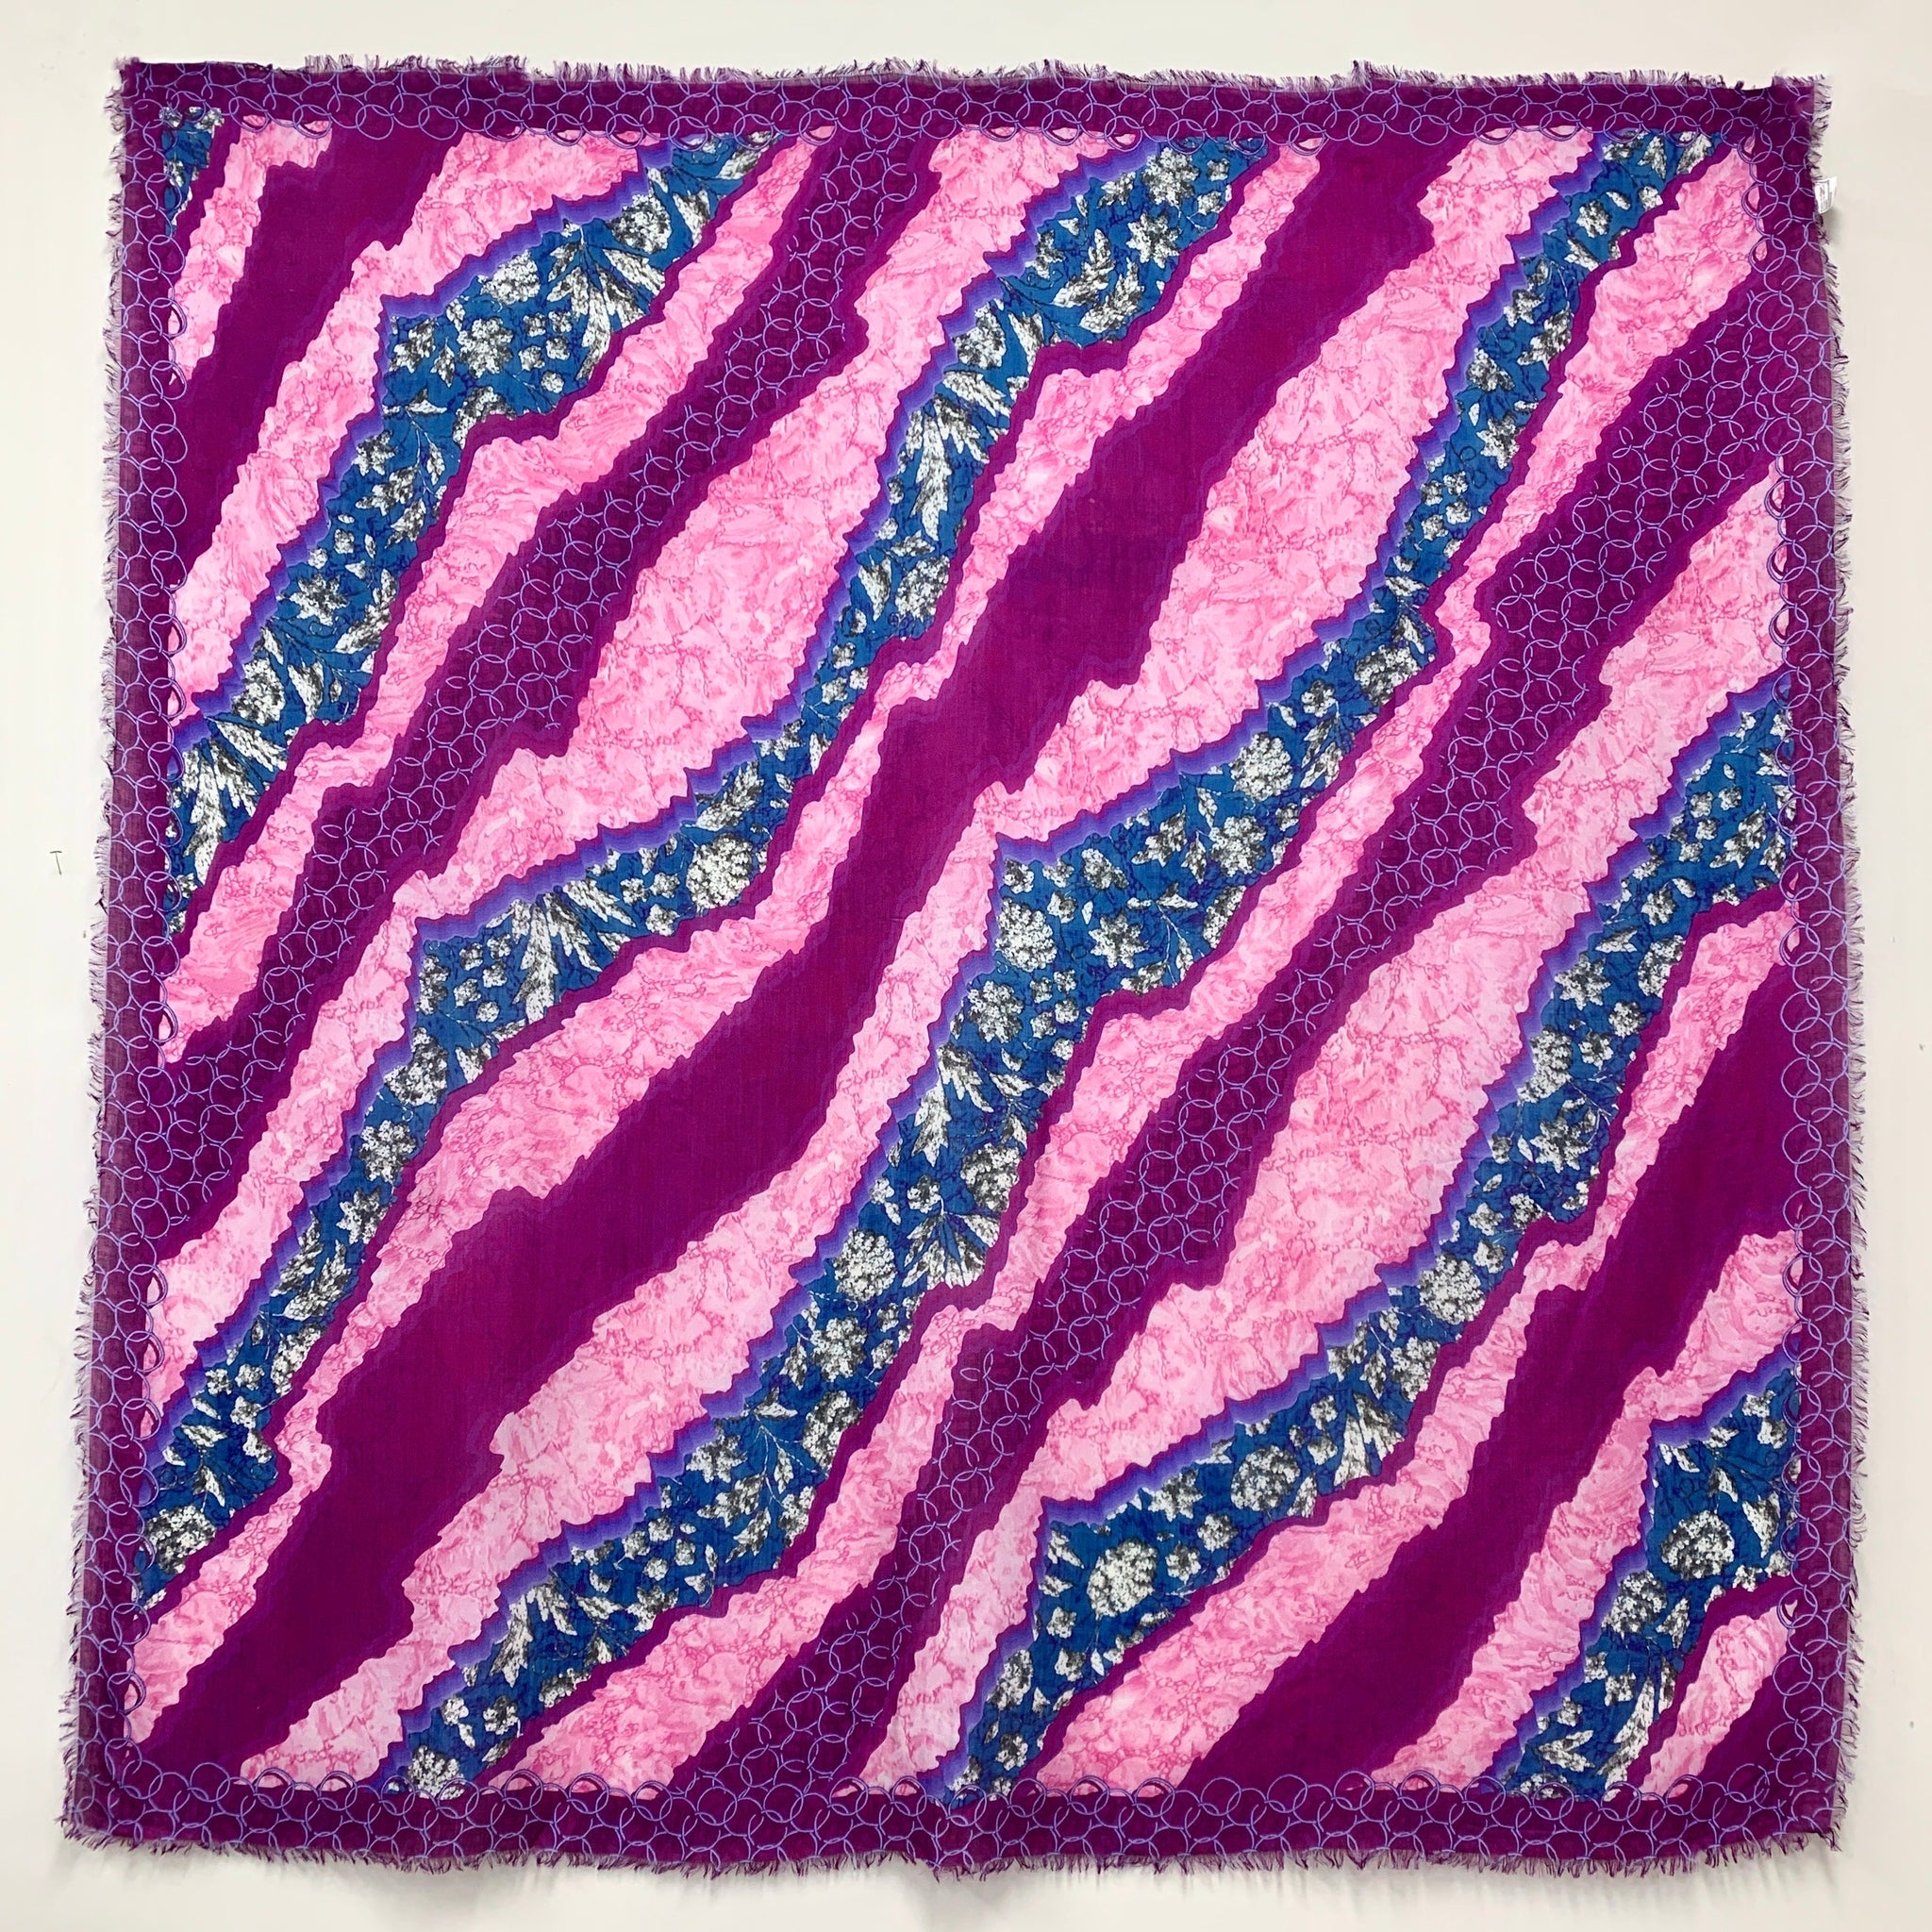 DS-2011 "PALCOYO" - PETER PILOTTO DIGITAL PRINT CASHMERE MODAL SCARF. MADE IN ITALY